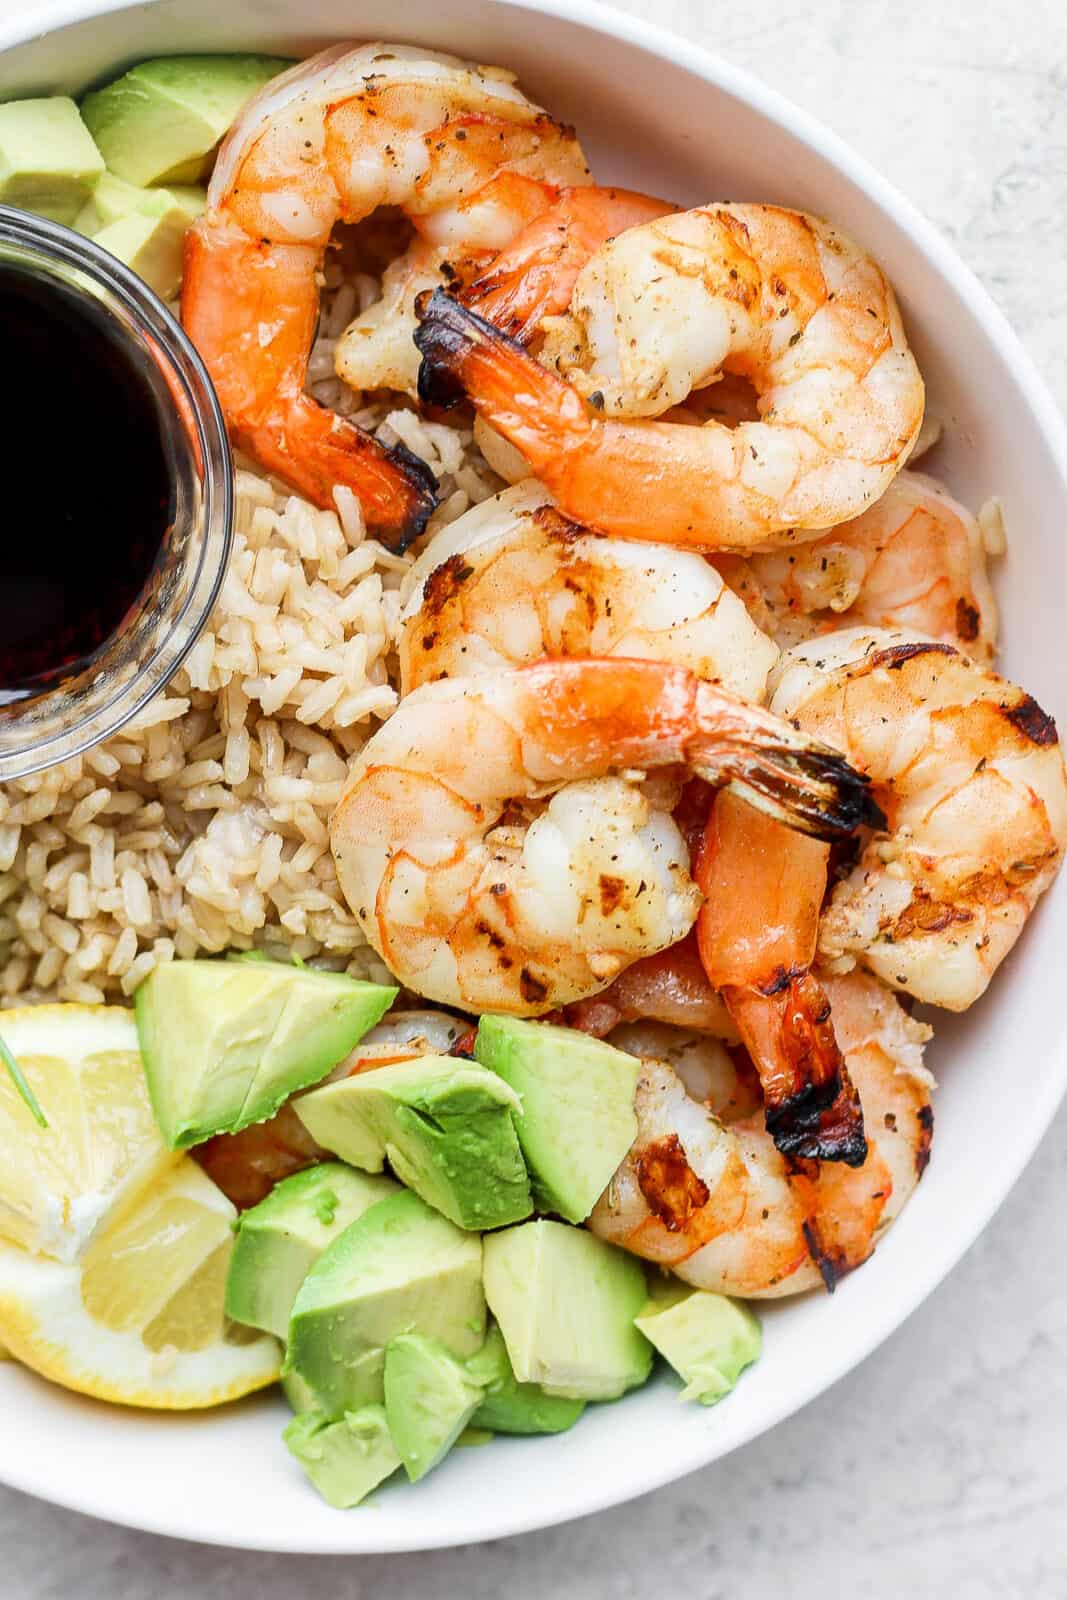 Shrimp rice bowl with a small dish of soy sauce.